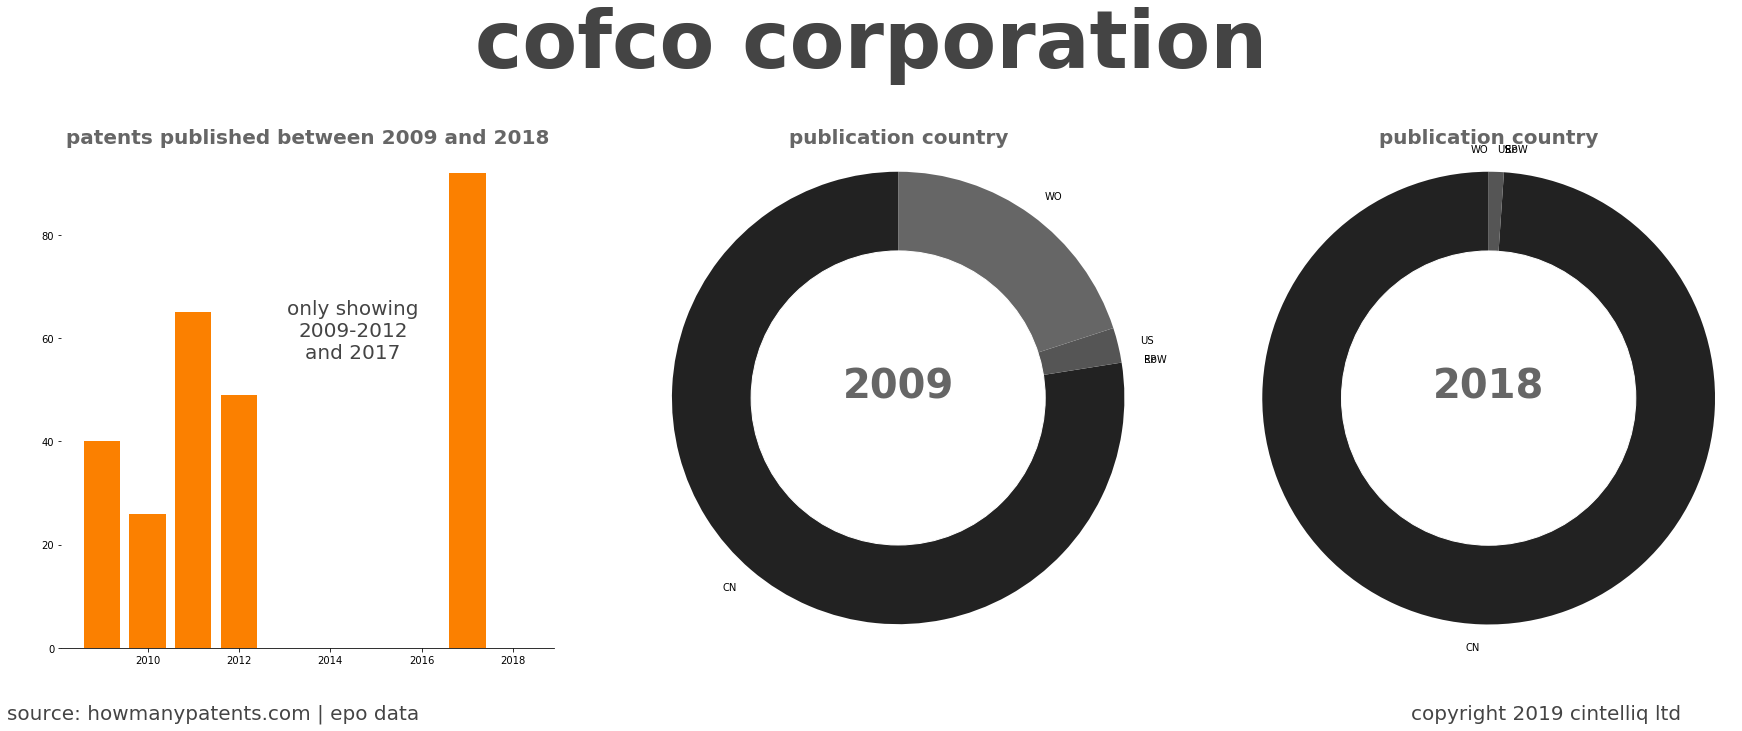 summary of patents for Cofco Corporation